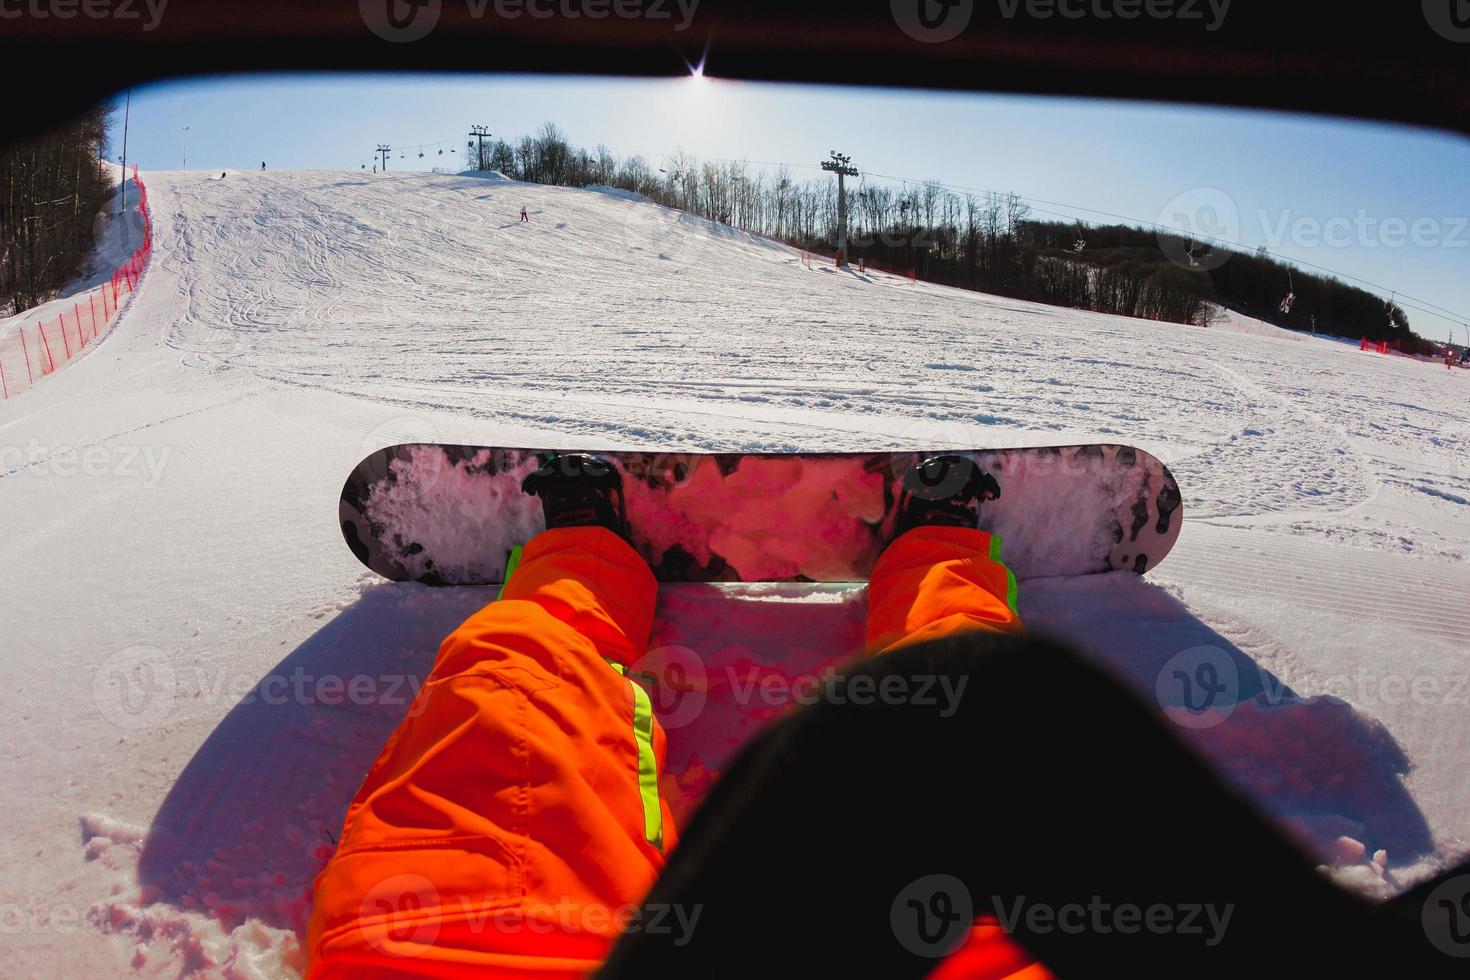 Point of view shot of a male snowboarder sitting on the snow photo